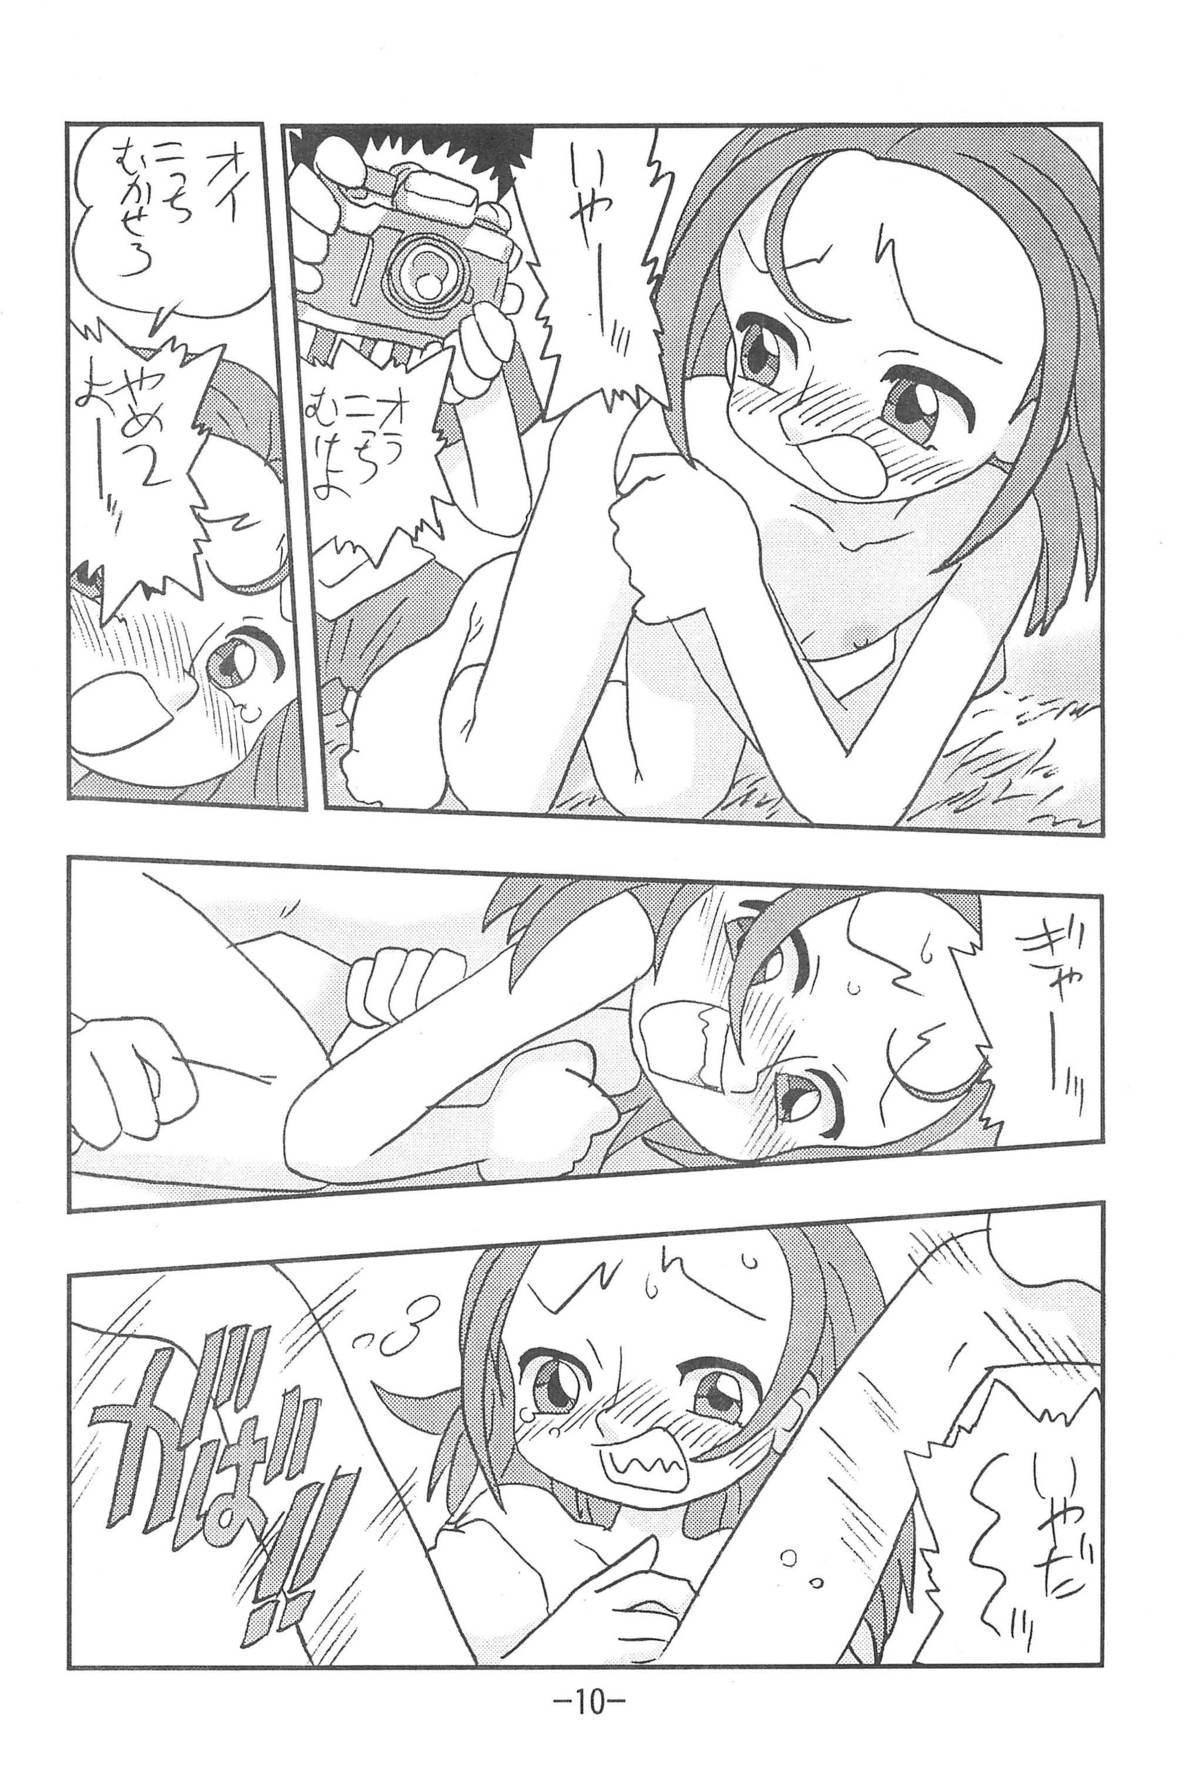 Sapphicerotica Scoop is my Business - Ojamajo doremi Butthole - Page 10